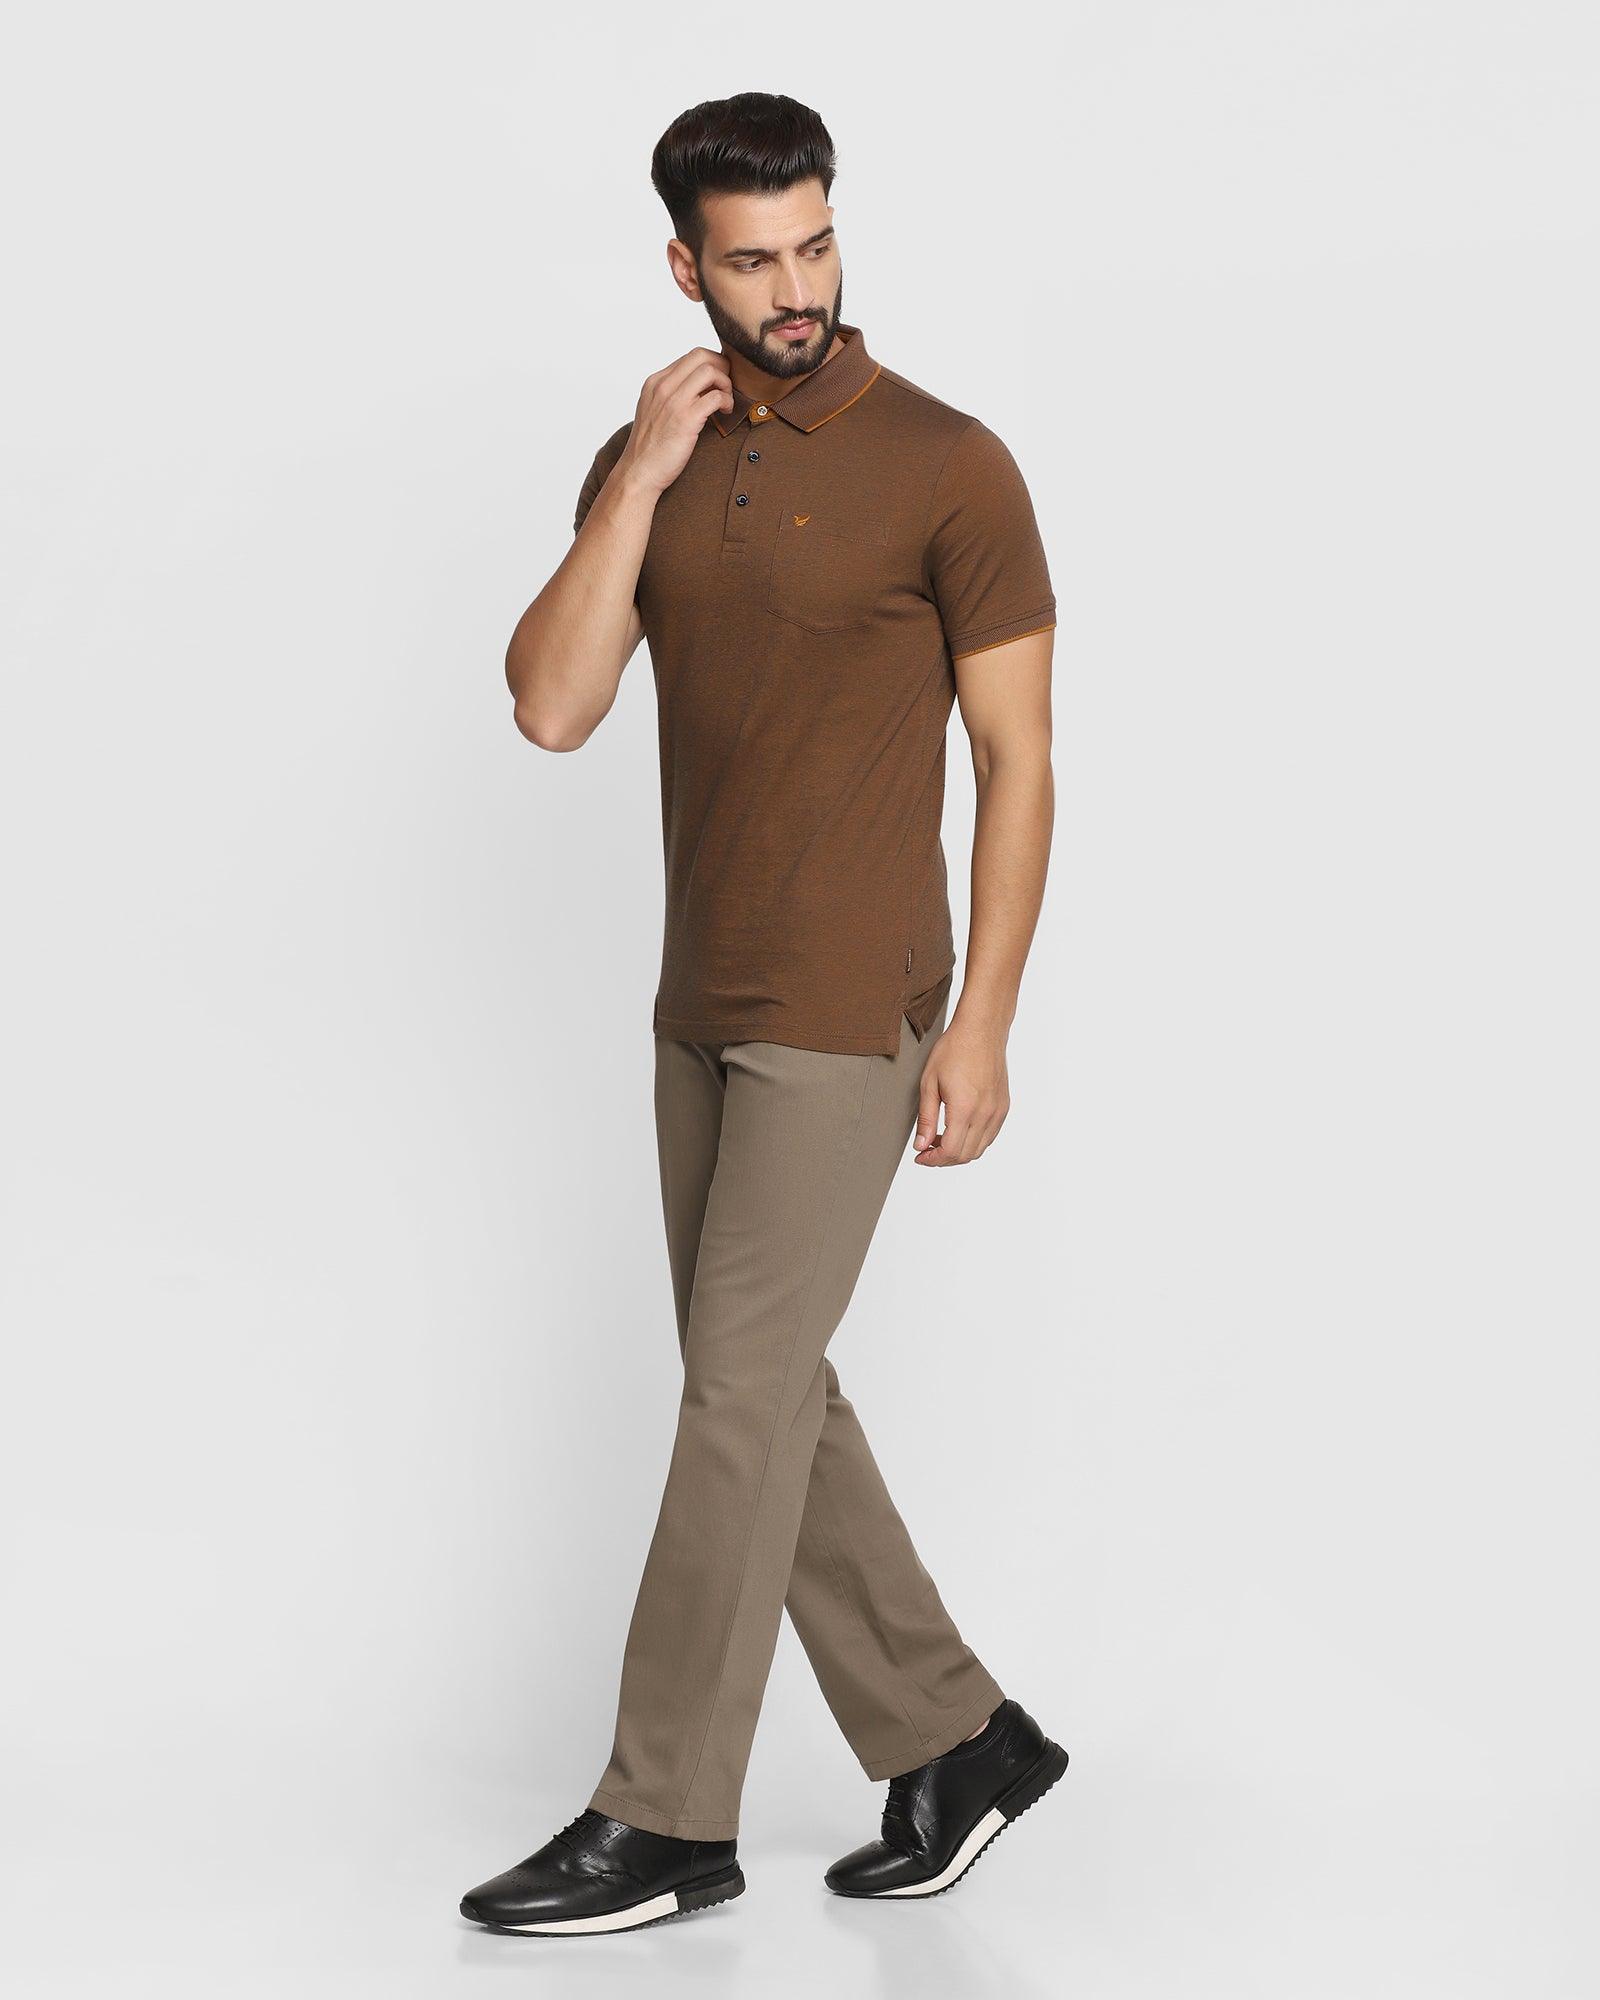 Straight B-90 Casual Mouse Textured Khakis - Regues